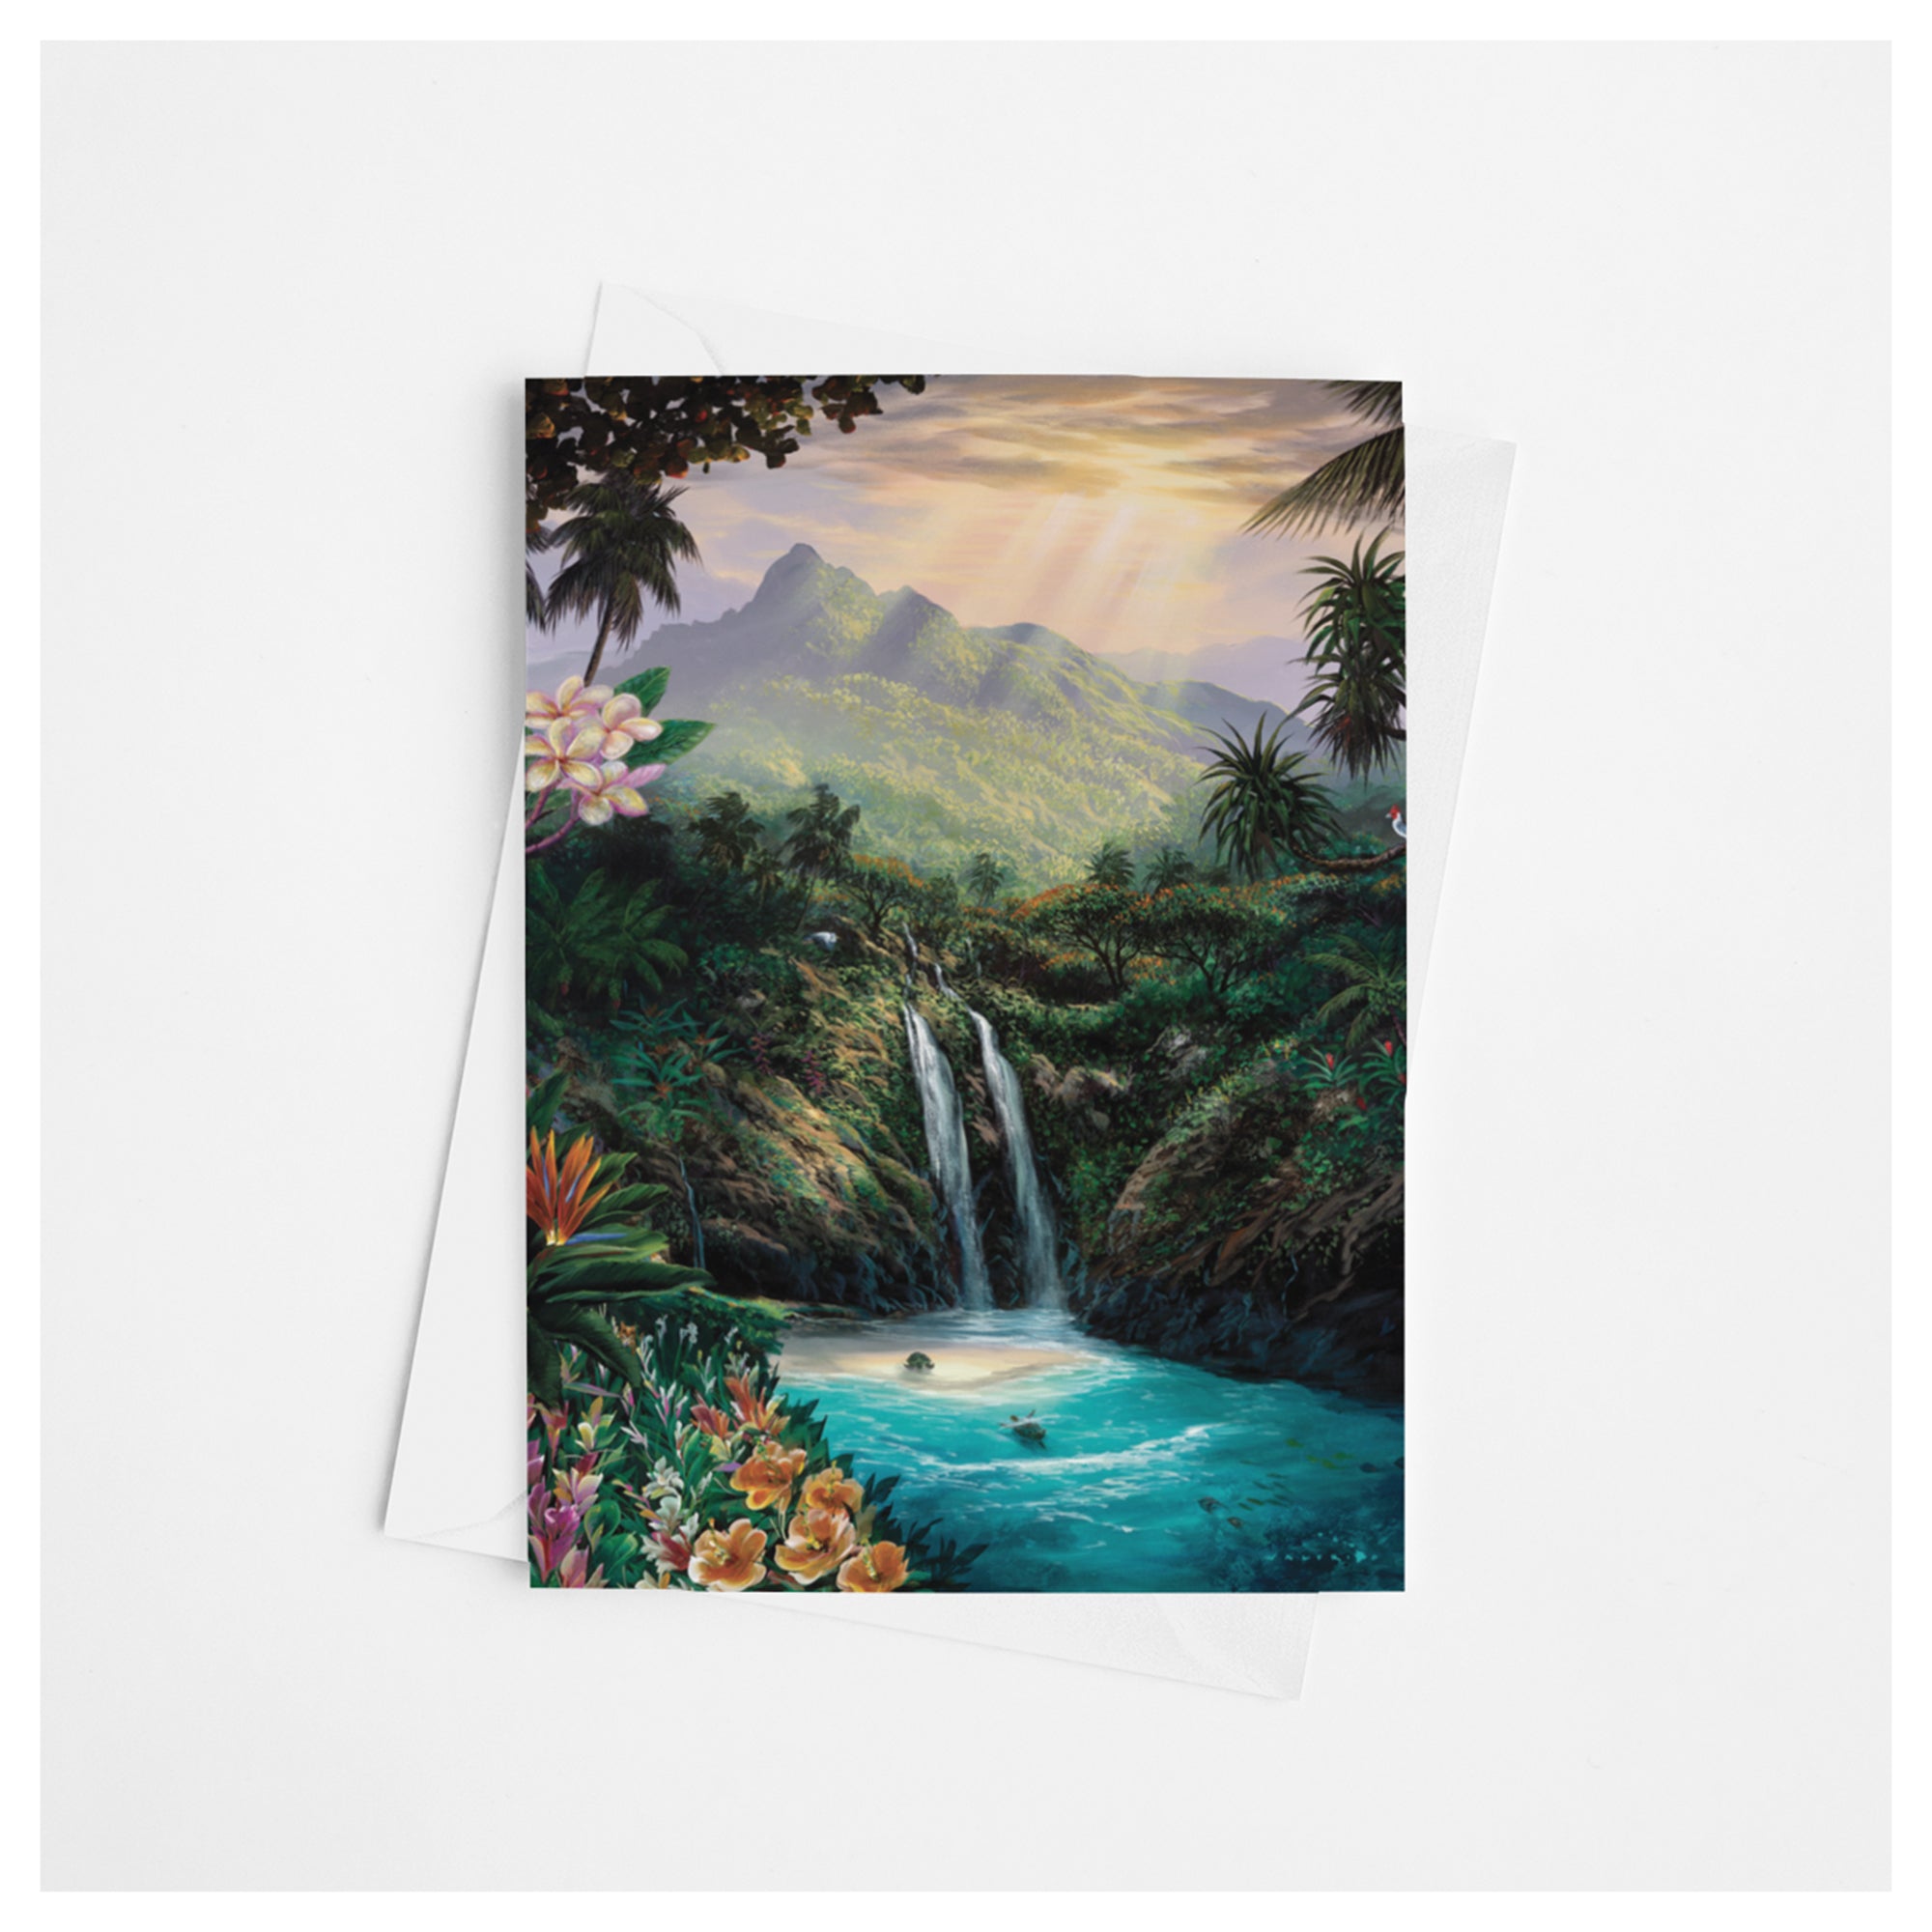 A greeting card that features a stunning view of an island waterfall with turtles swimming below by Hawaii artist Walfrido Garcia